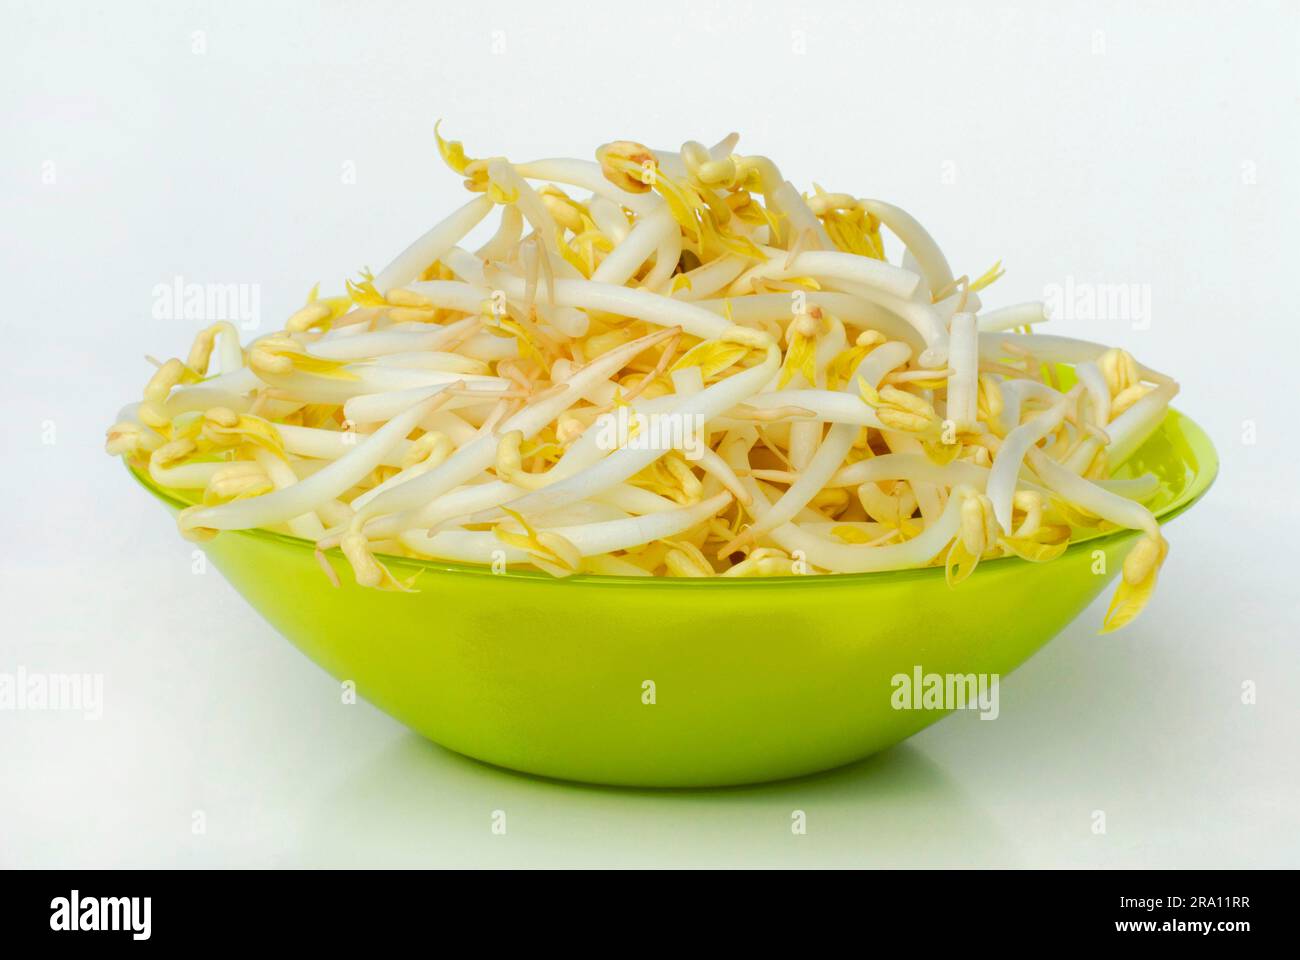 Mung beanstree sprouts in shell (Vigna mungo) (Phaseolus mungo), Mung beans (Phaseolus radiatus) (Vigna radiata) Seedlings Stock Photo